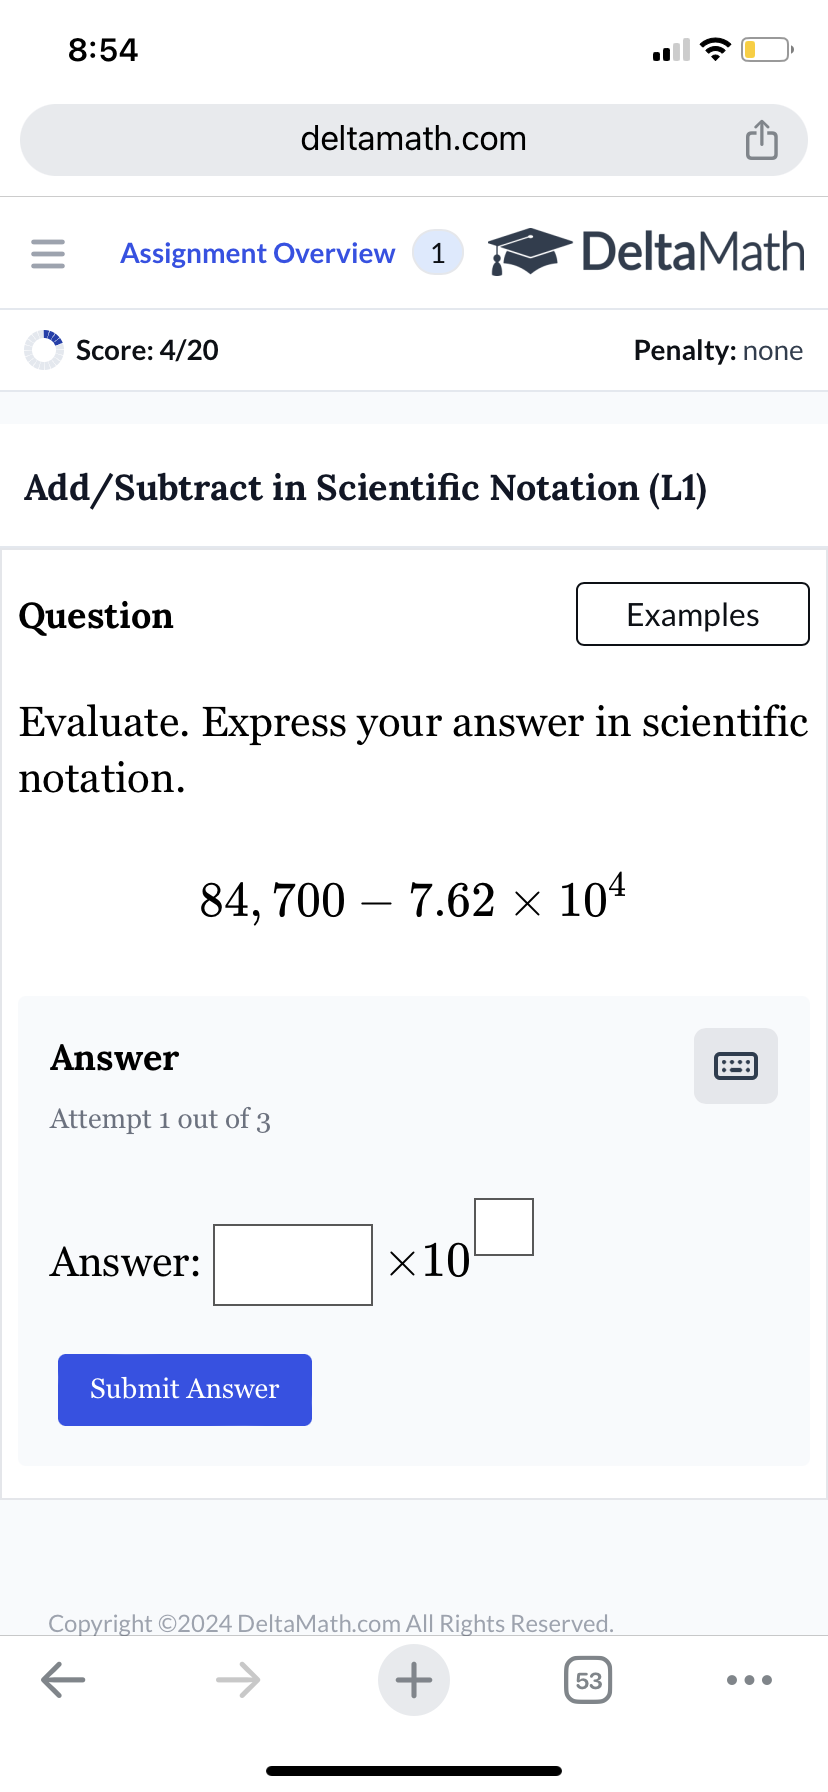 8:54
deltamath.com
= Assignment Overview 1
DeltaMath
Score: 4/20
Penalty: none
Add/Subtract in Scientific Notation (L1)
Question
Examples
Evaluate. Express your answer in scientific
notation.
84, 700 7.62 × 104
Answer
Attempt 1 out of 3
Answer:
Submit Answer
×10
Copyright ©2024 DeltaMath.com All Rights Reserved.
←
+
53